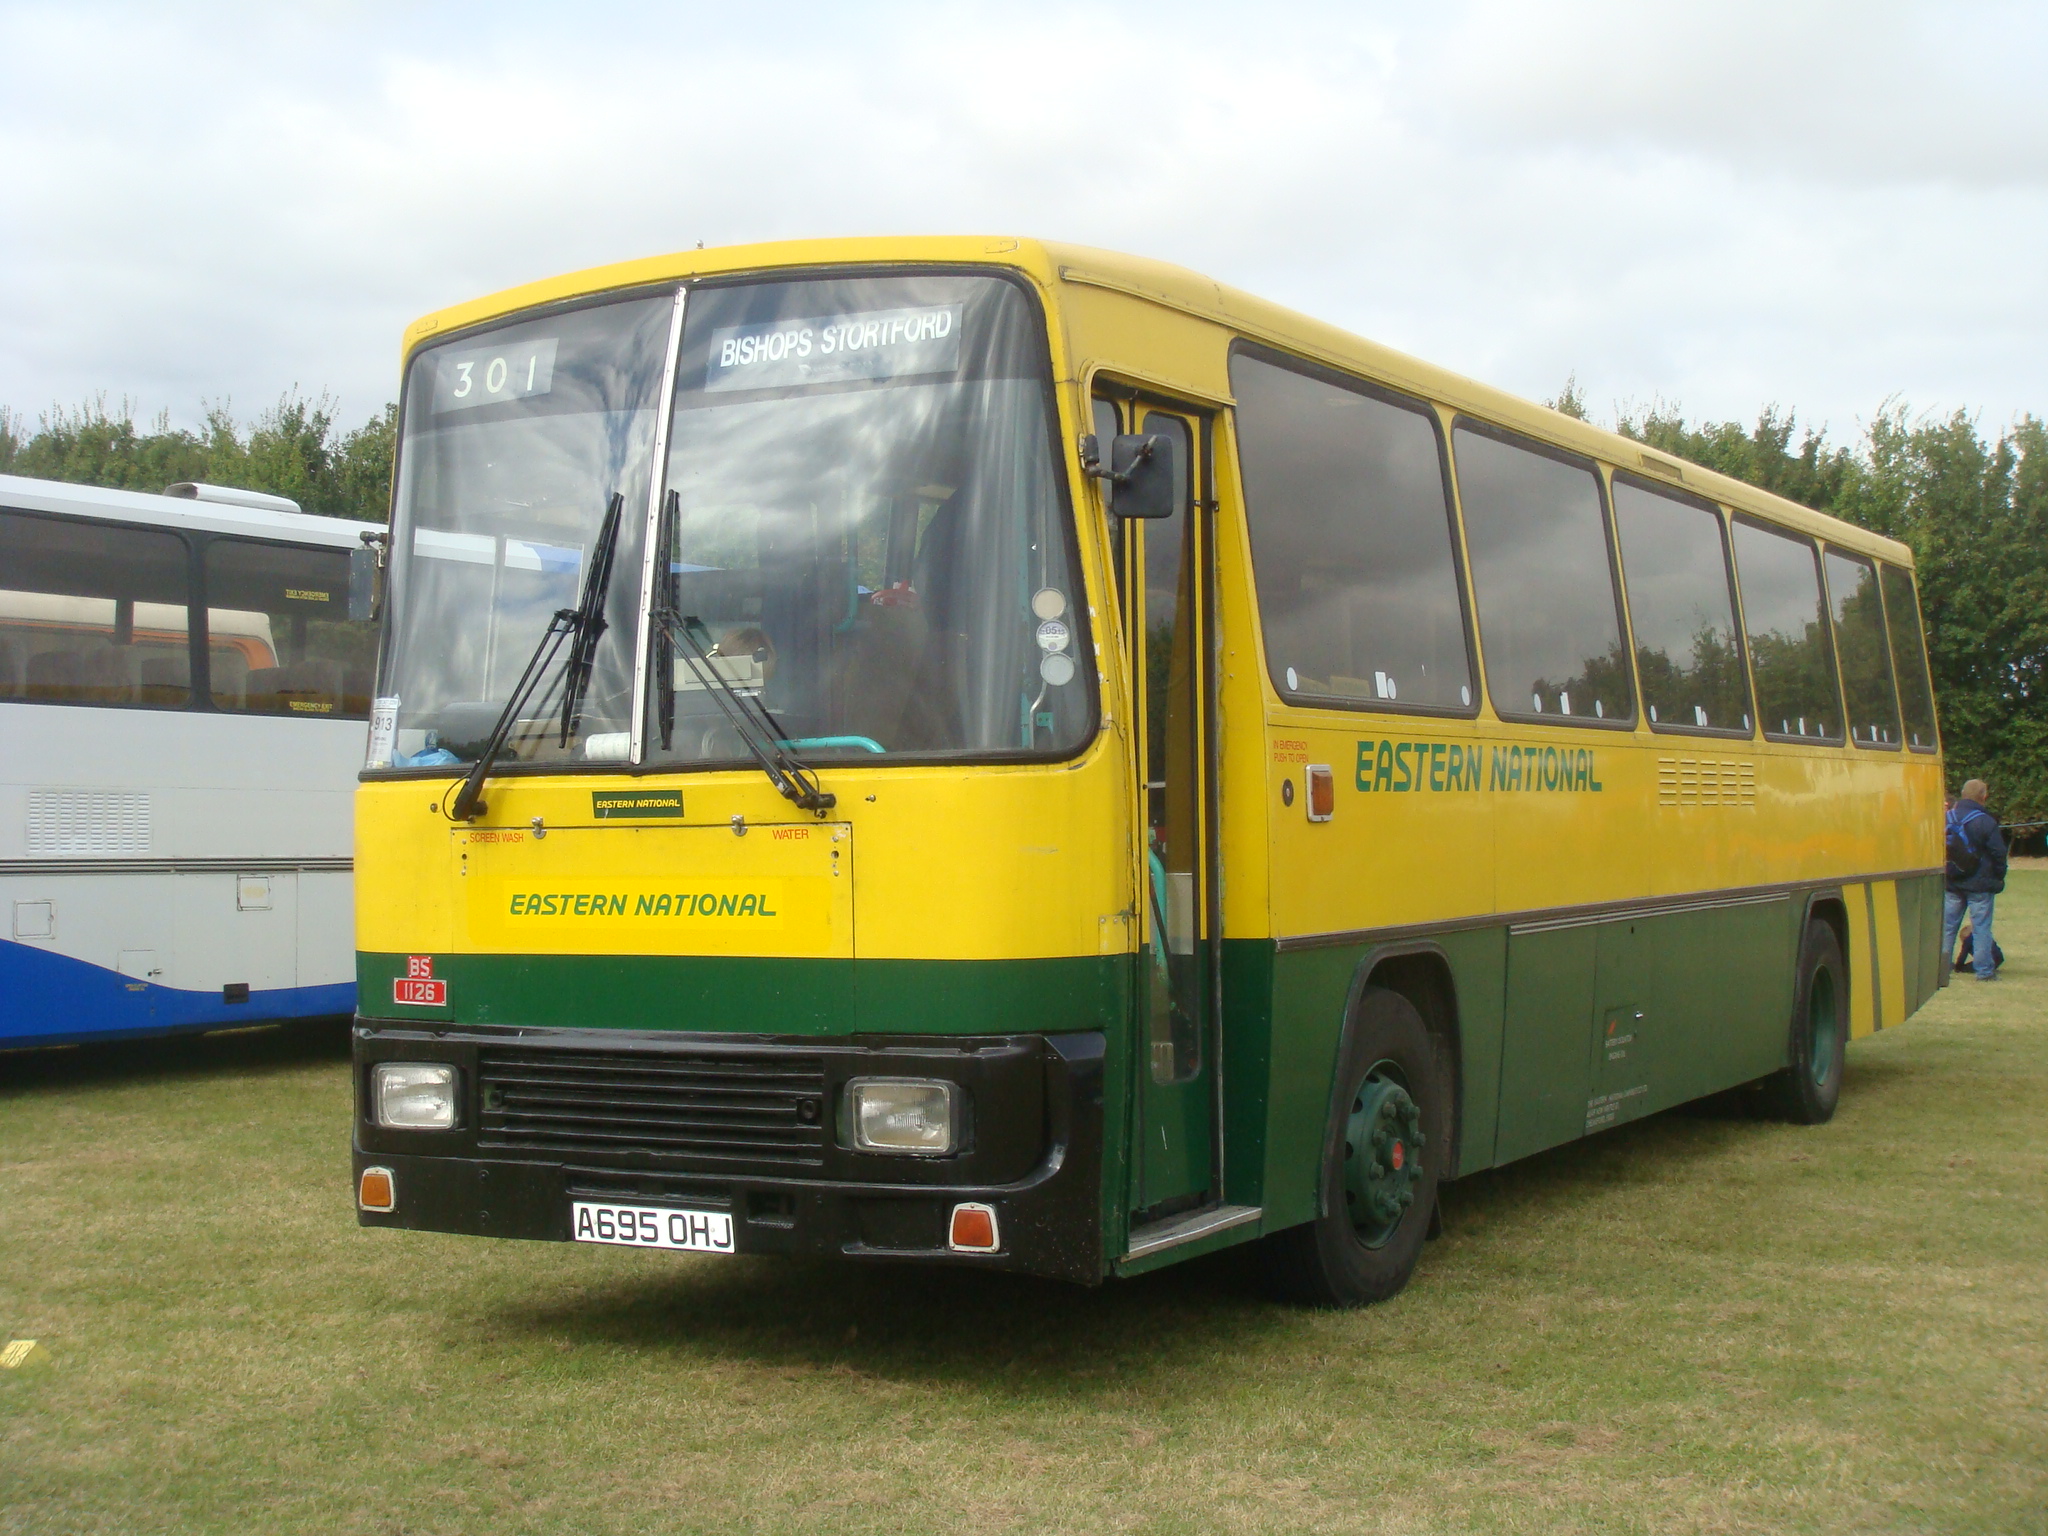 a yellow bus with a green front parked on the grass